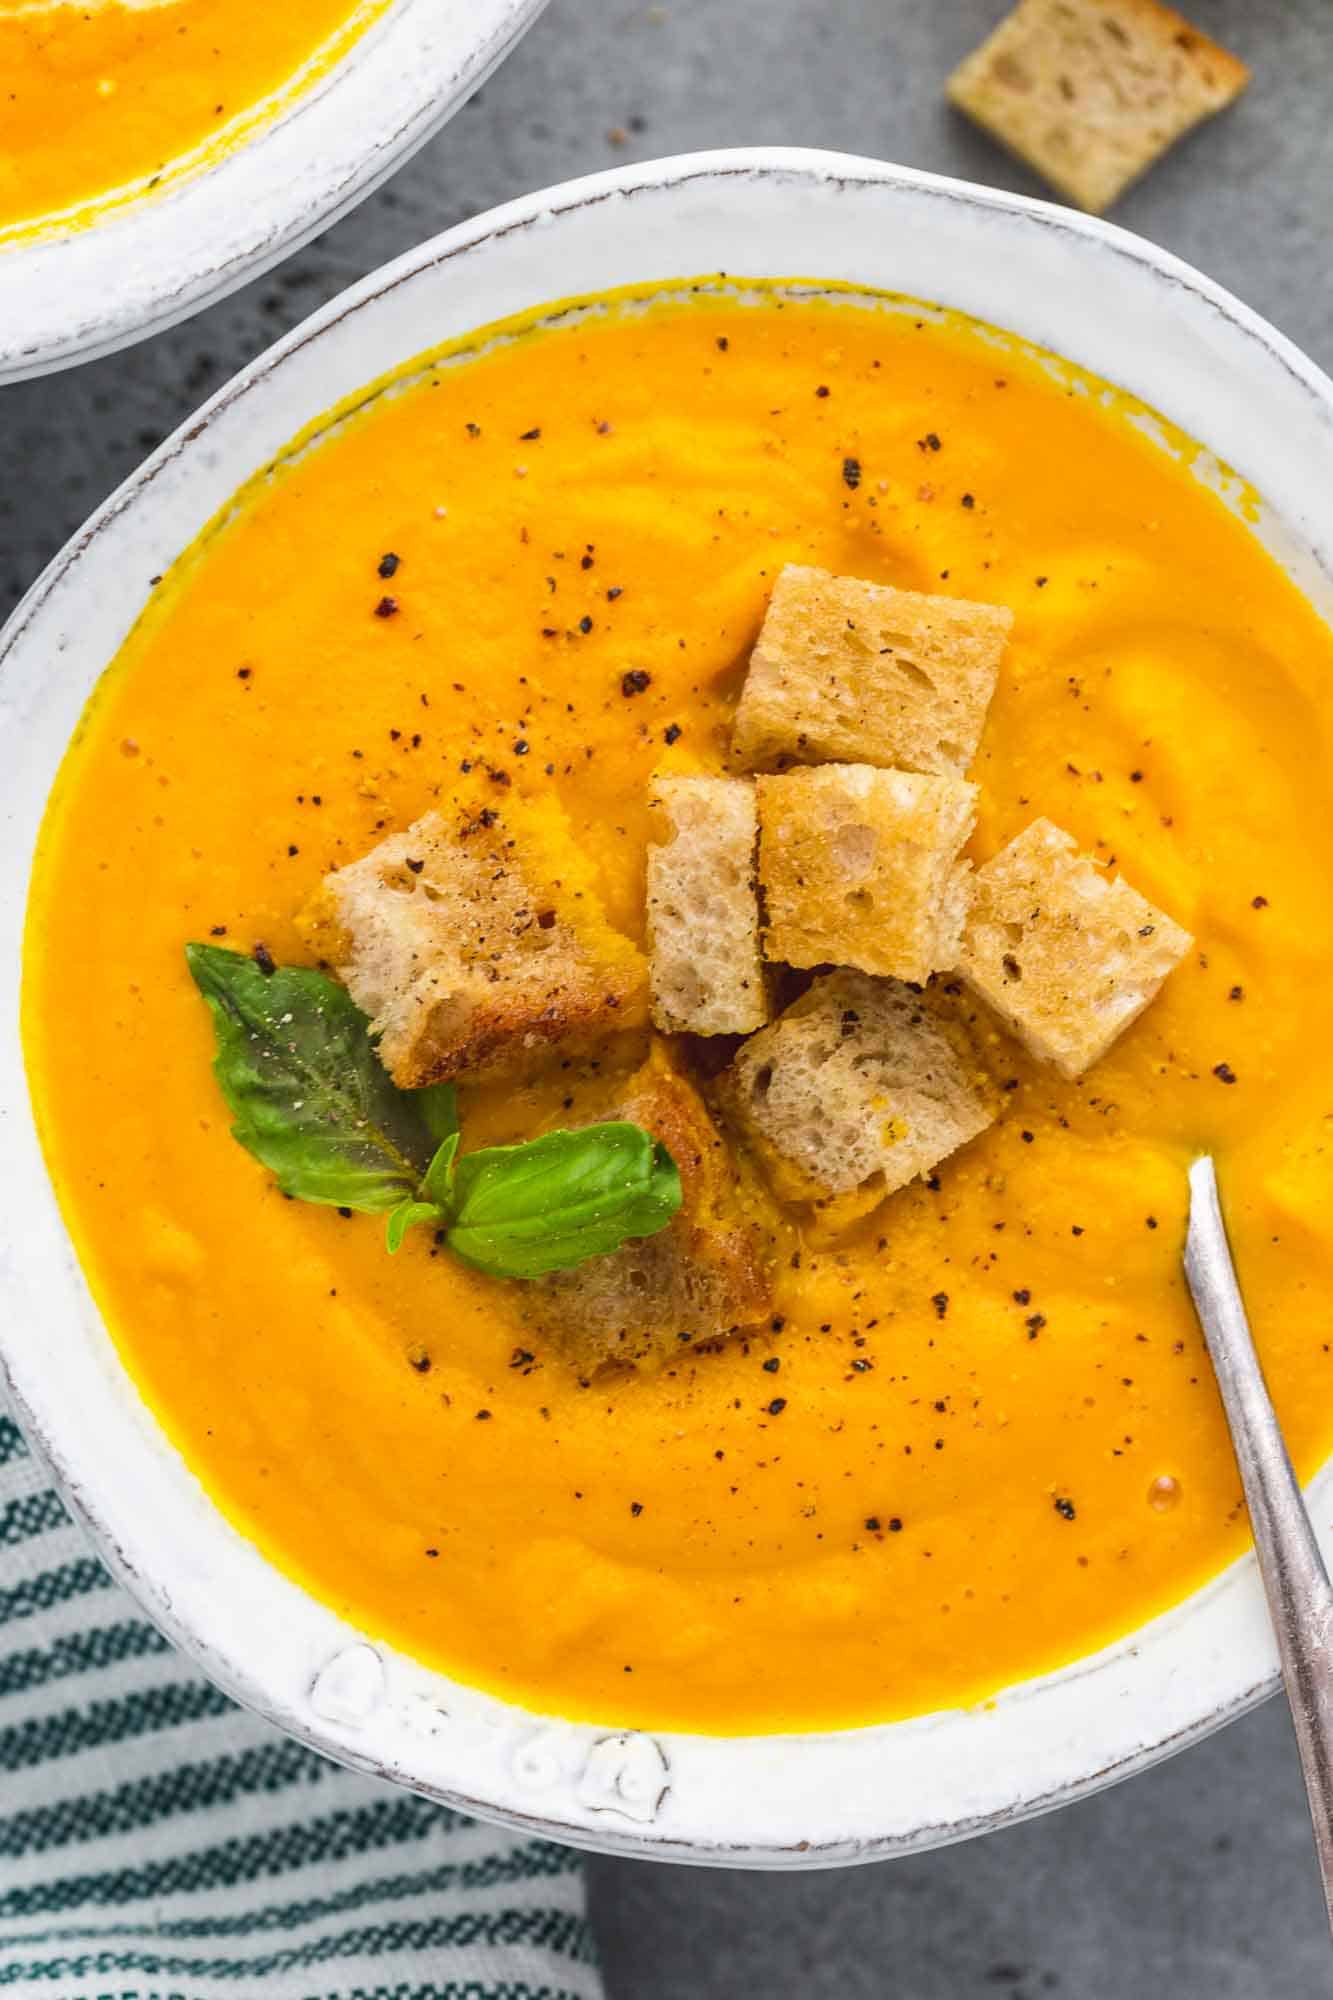 Creamy roasted carrot soup in a white bowl served with homemade croutons and basil leaves